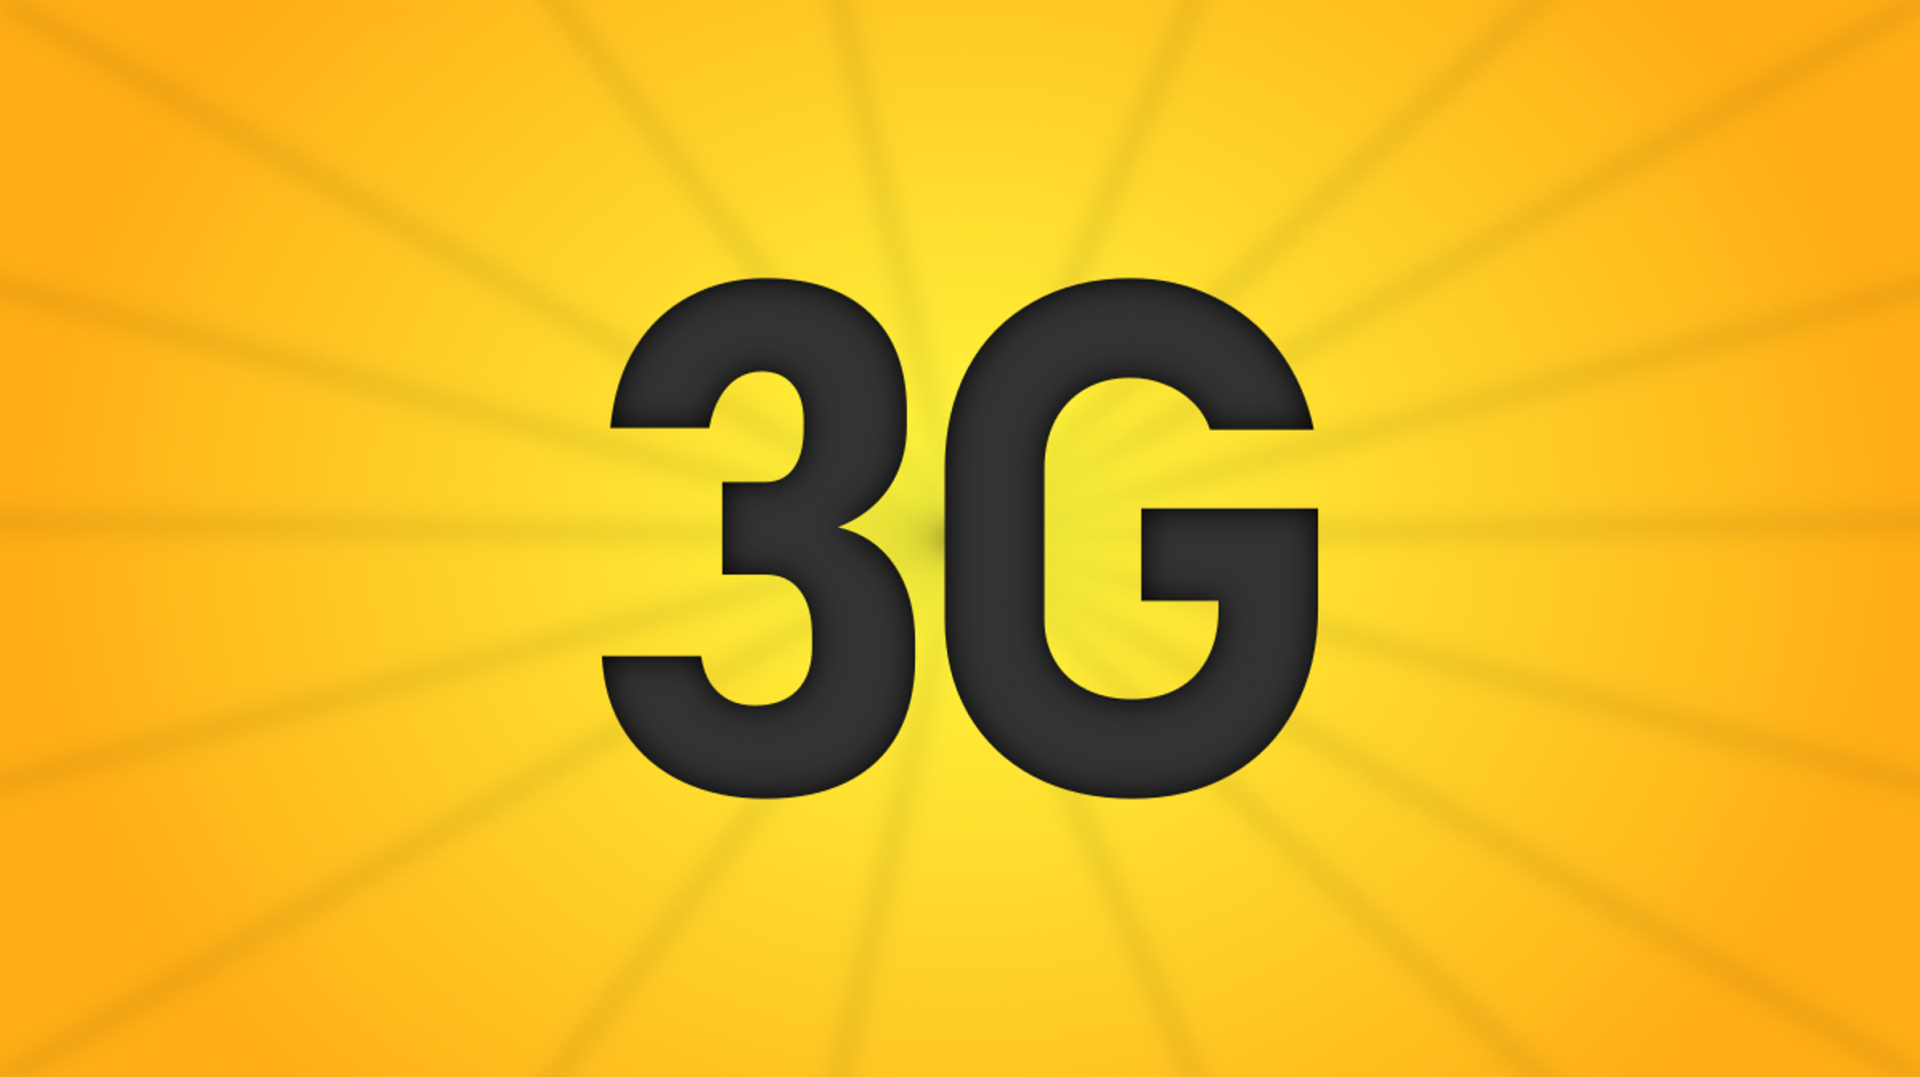 When Are U.S. Carriers Shutting Down Their 3G Networks?